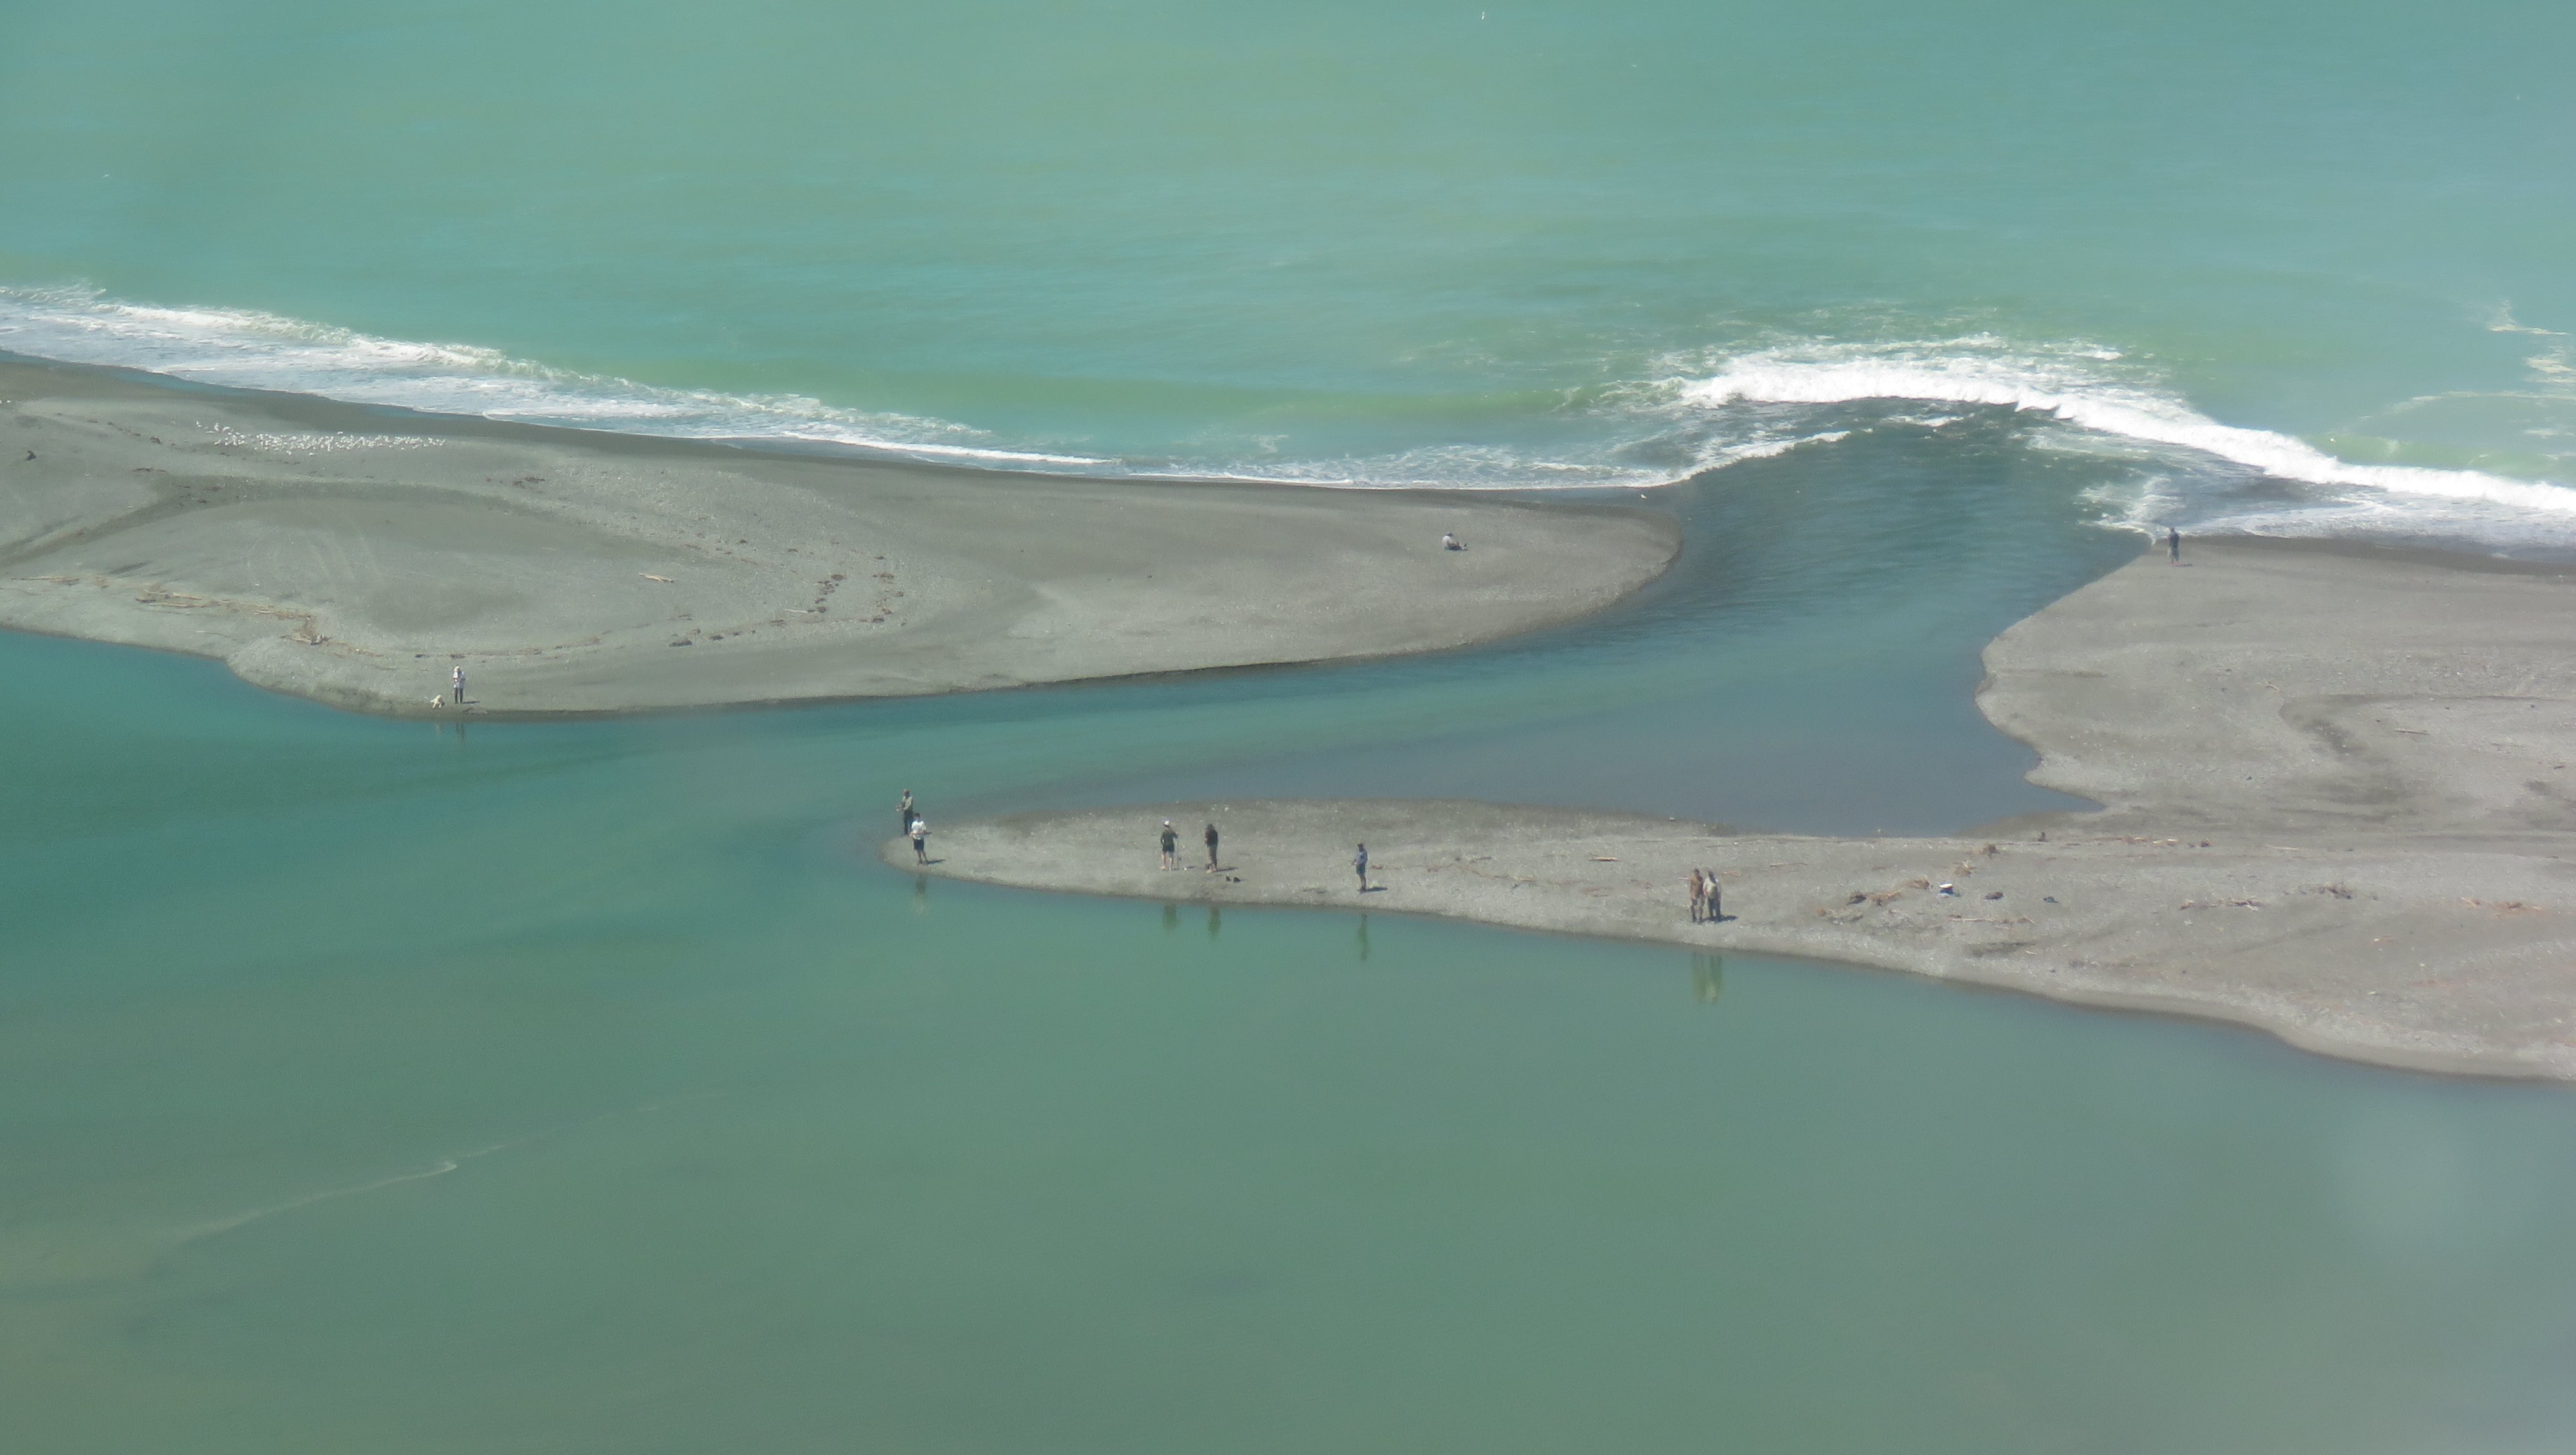 WFR1819.41The Opihi River mouth with several angler trying their luck 29 01 2019 Credit R Adams